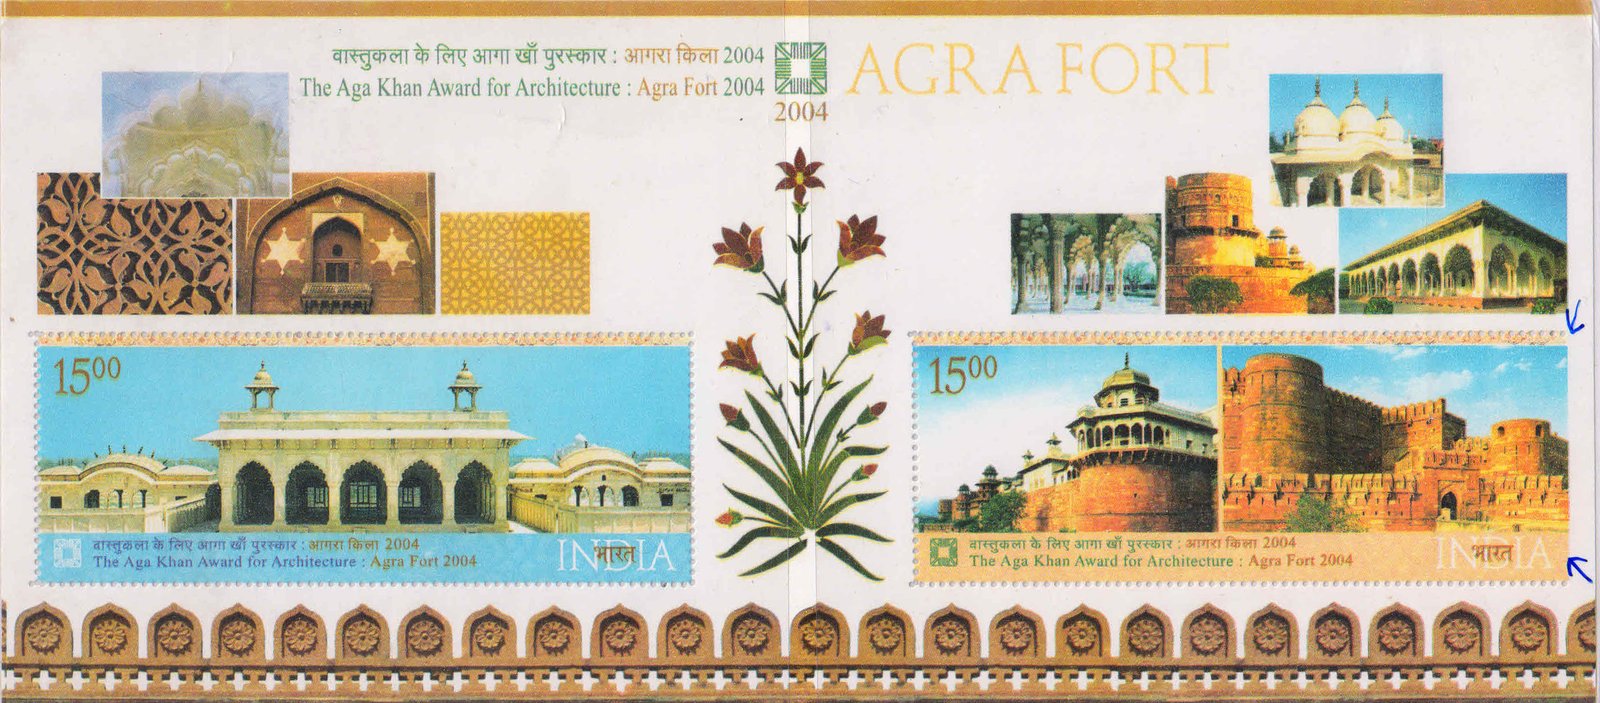 INDIA 2004-Agra Fort Miniature Sheet Imperf Error-One side Imperf, MNH-Scare Variety